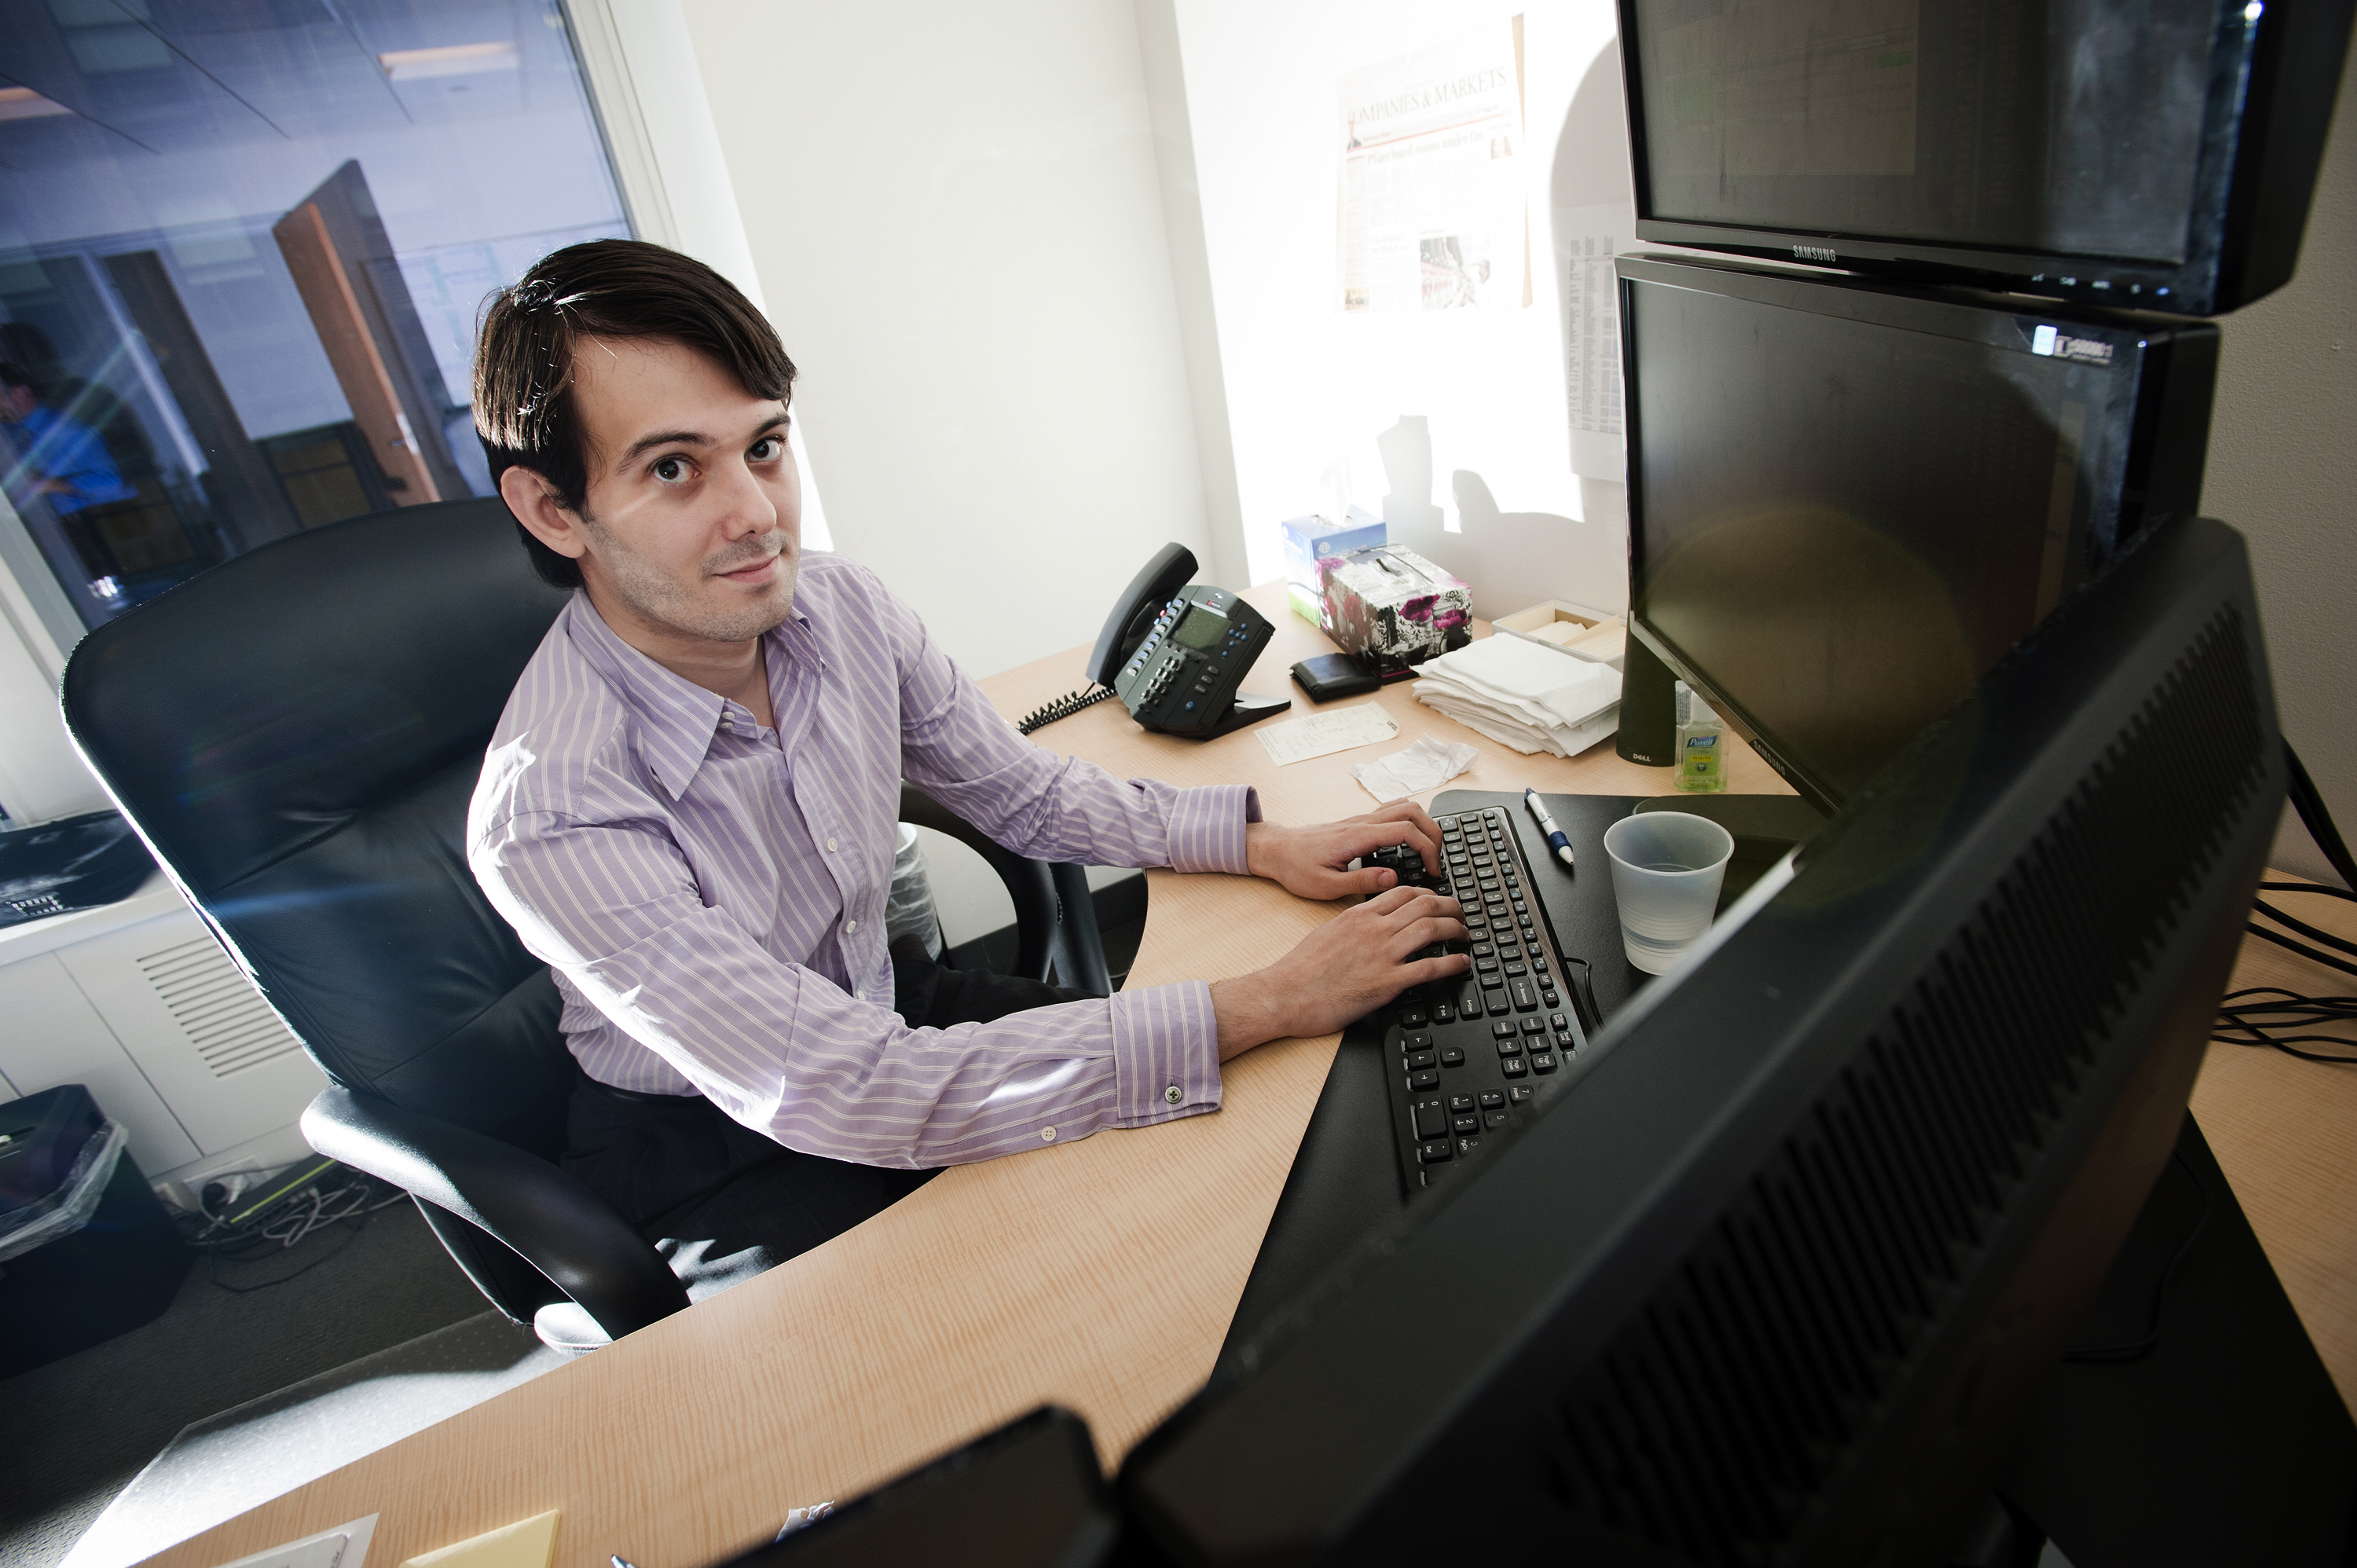 Martin Shkreli, chief investment officer of MSMB Capital Management, sits for a photograph in his office in New York City on Aug. 10, 2011. (Bloomberg/Getty Images)